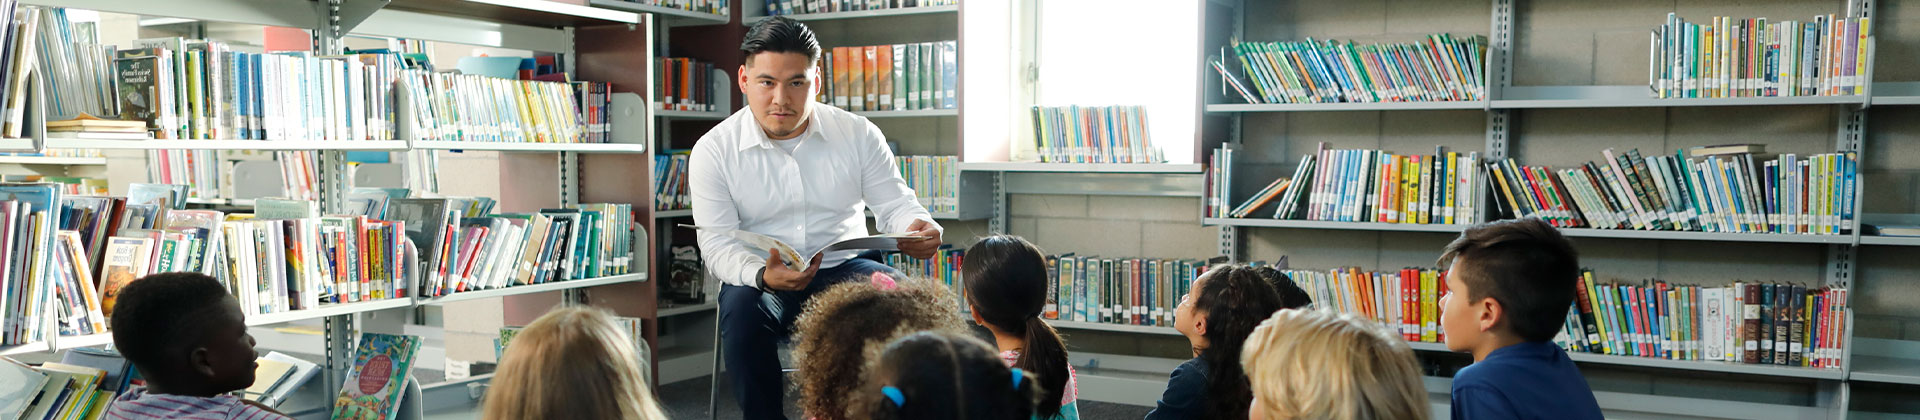 A man in a white dress shirt sits in a corner of a library and reads a story to young children, who are seated on the ground in front of him.